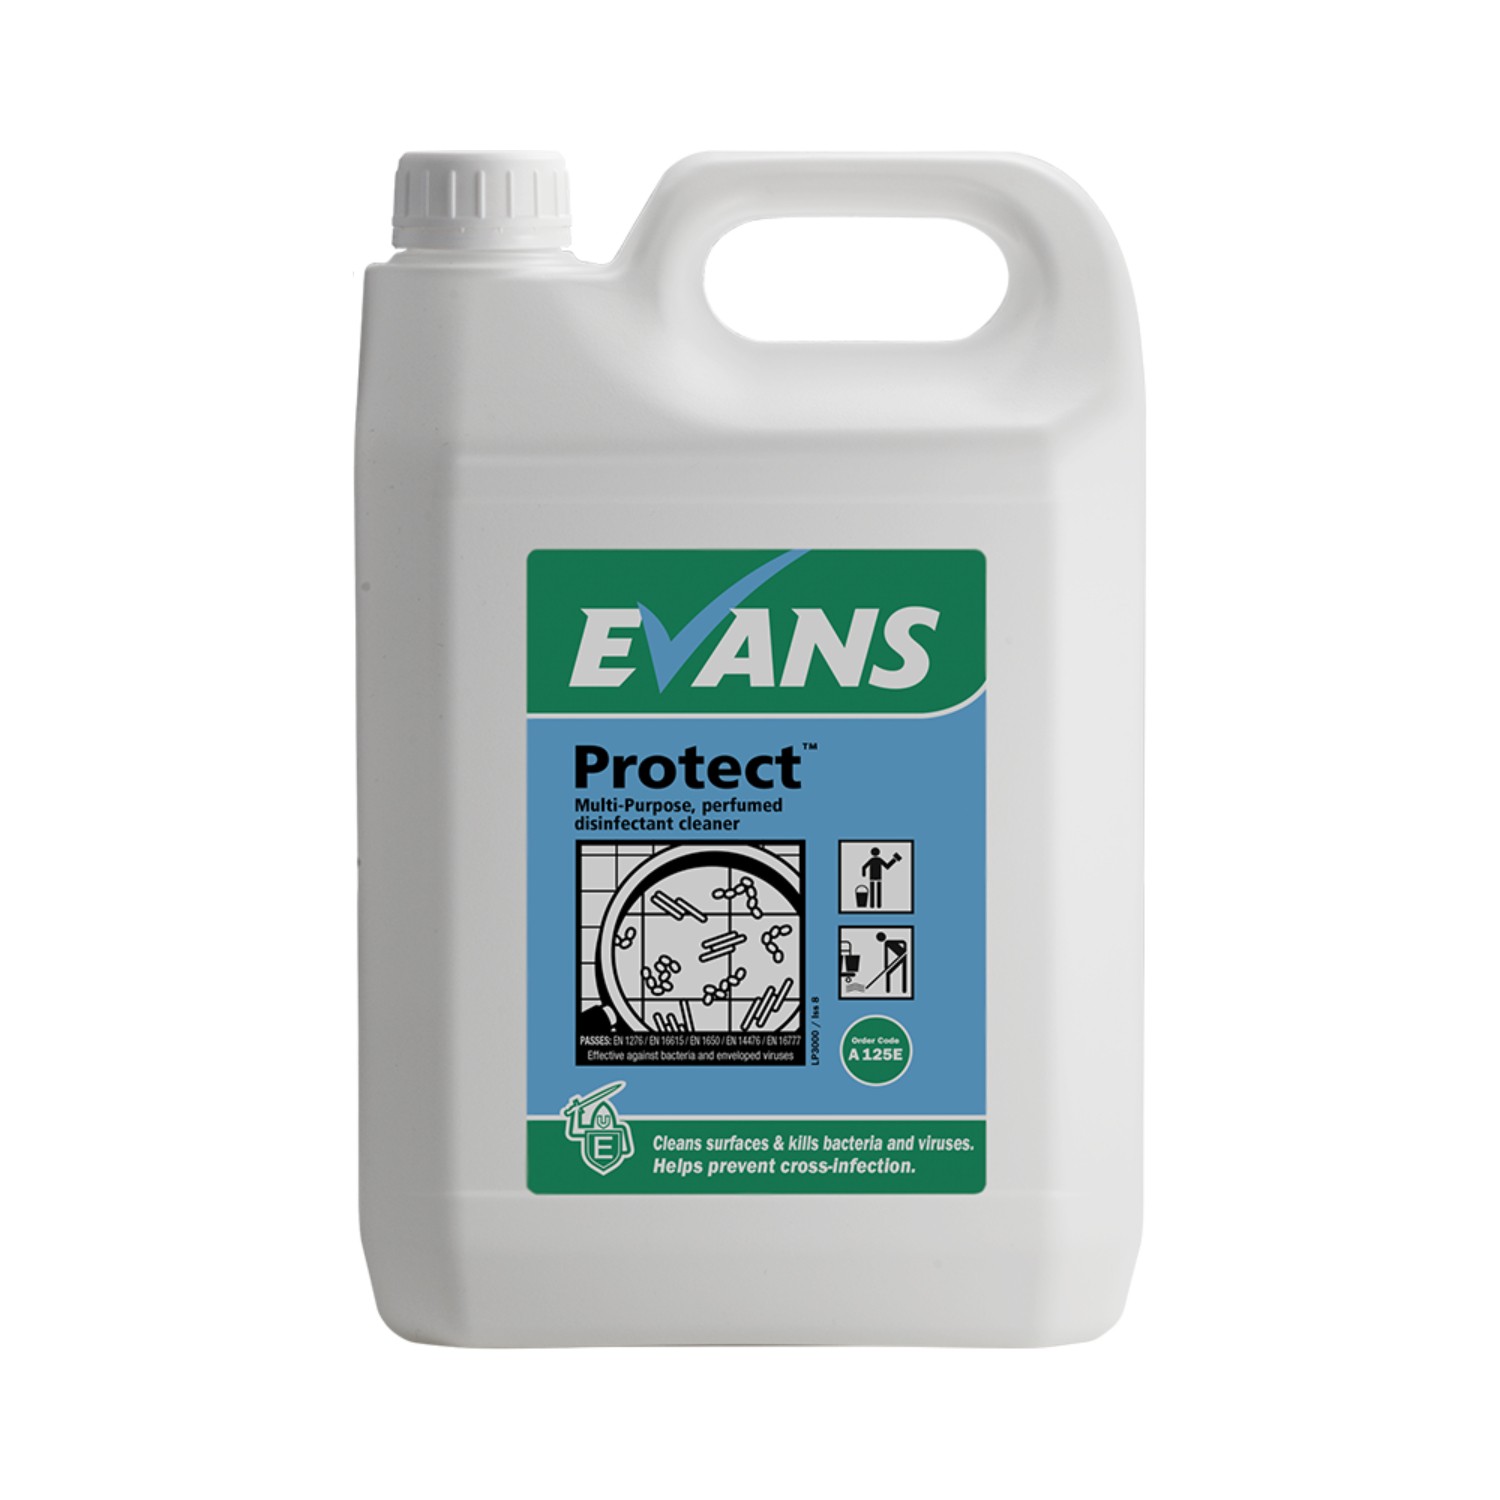 Evans+Protect+Disinfectant+Cleaner+5L